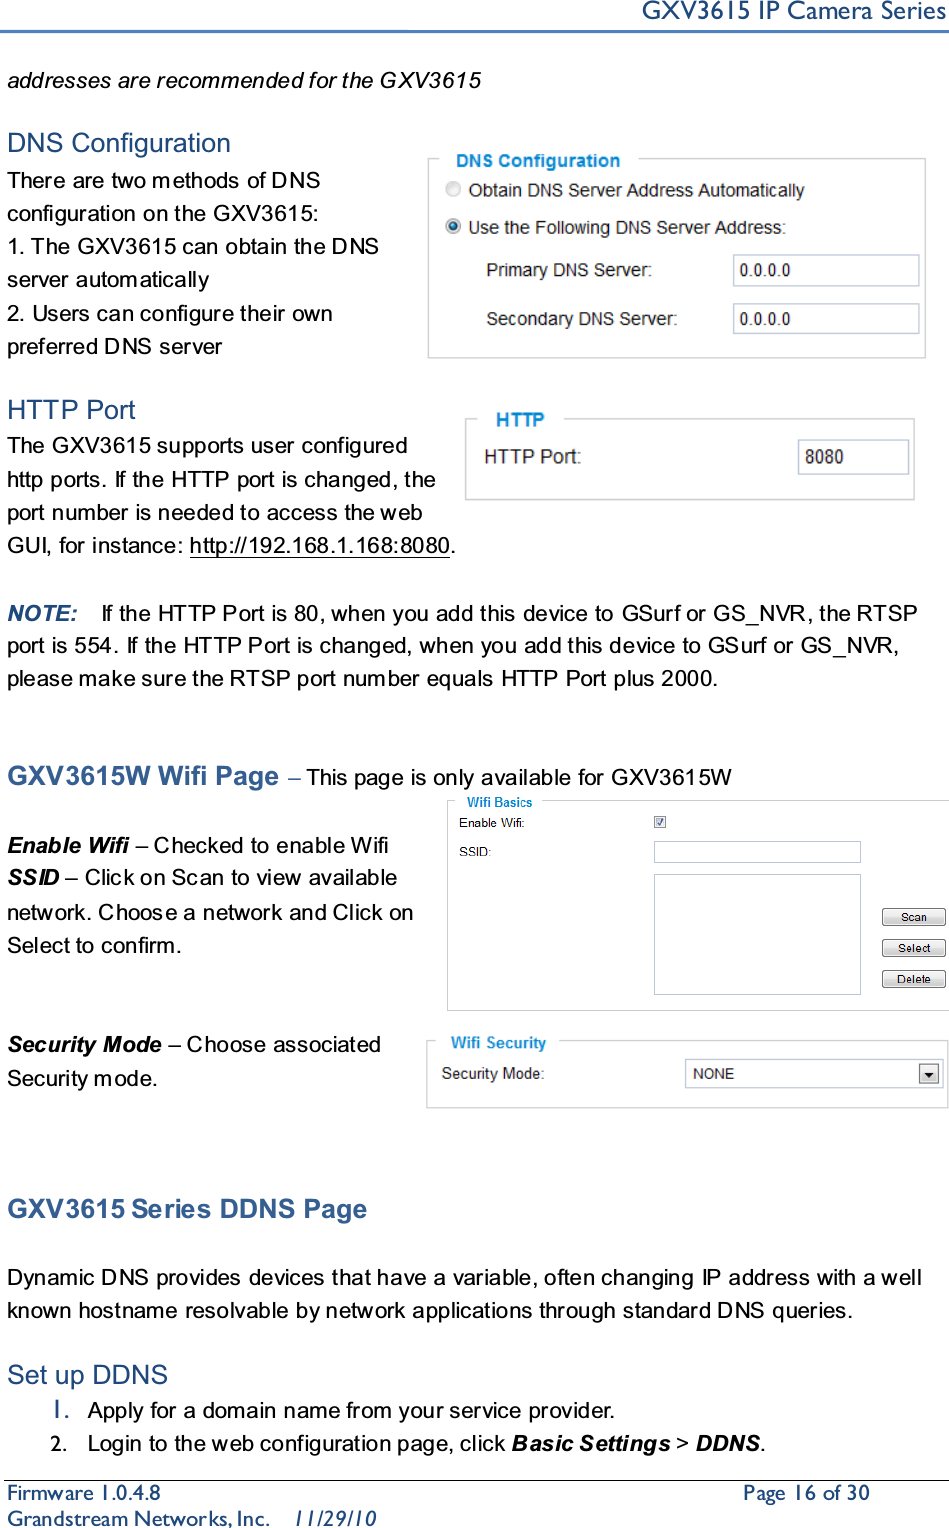 GXV3615 IP Camera SeriesFirmware 1.0.4.8                                                  Page16of 30    Grandstream Networks, Inc. 11/29/10addresses are recommended for the G XV3615DNS Configuration There are two m ethods of DNS configuration on the GXV3615:1. The GXV3615 can obtain the DNS server automatically2. Users can configure their own preferred DNS serverHTTP Port The GXV3615 supports user configured http ports. If the HTTP port is changed, the port number is needed to access the web GUI, for instance: http://192.168.1.168:8080.NOTE: If the HTTP Port is 80, when you add this device to GSurf or GS_NVR, the RTSP port is 554. If the HTTP Port is changed, when you add this device to GSurf or GS_NVR, please make sure the RTSP port num ber equals HTTP Port plus 2000. GXV3615W Wifi Page ±This page is only available for GXV3615WEnable Wifi ±Checked to enable WifiSSID ±Clic k on Sc an to view available network. Choos e a network and Click on Select to confirm.Security Mode ±Choose associated Security mode.GXV3615 Series DDNS PageDynamic DNS provides devices that have a variable, often changing IP address with a w ell known hostname resolvable by network applications through standard DNS queries. Set up DDNS1. Apply for a domain name from your service provider.2. Login to the web configuration page, click Basic Settings &gt;DDNS.